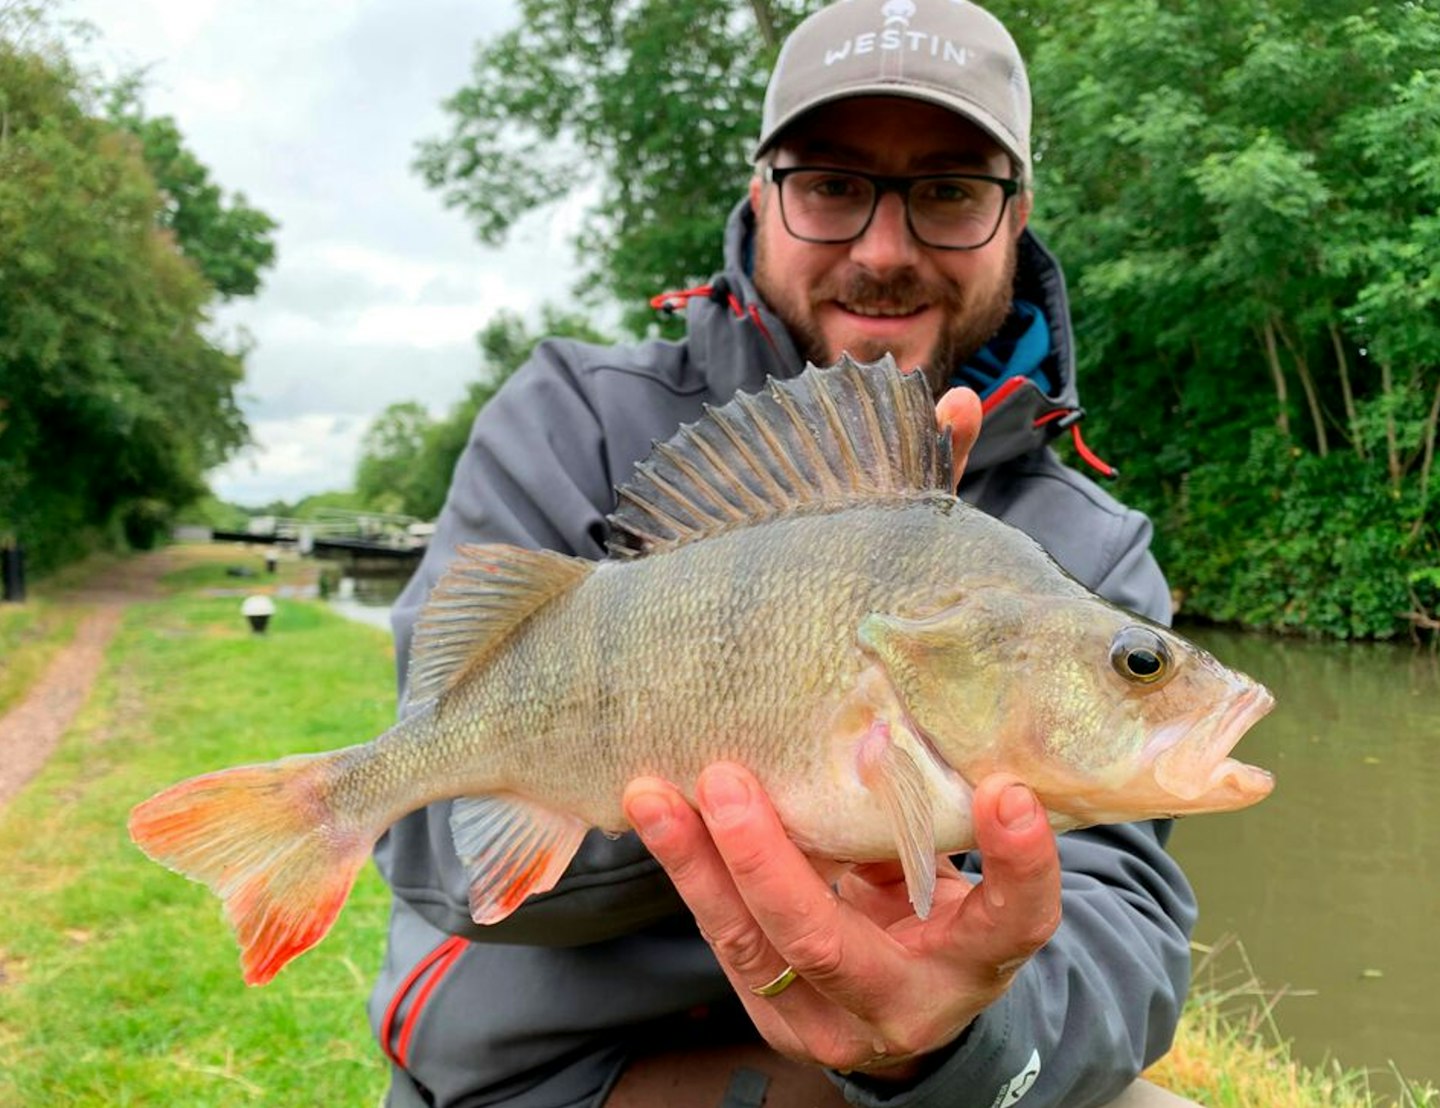 There are some superb perch of 2lb, 3lb or even 4lb-plus in many canals all around the UK